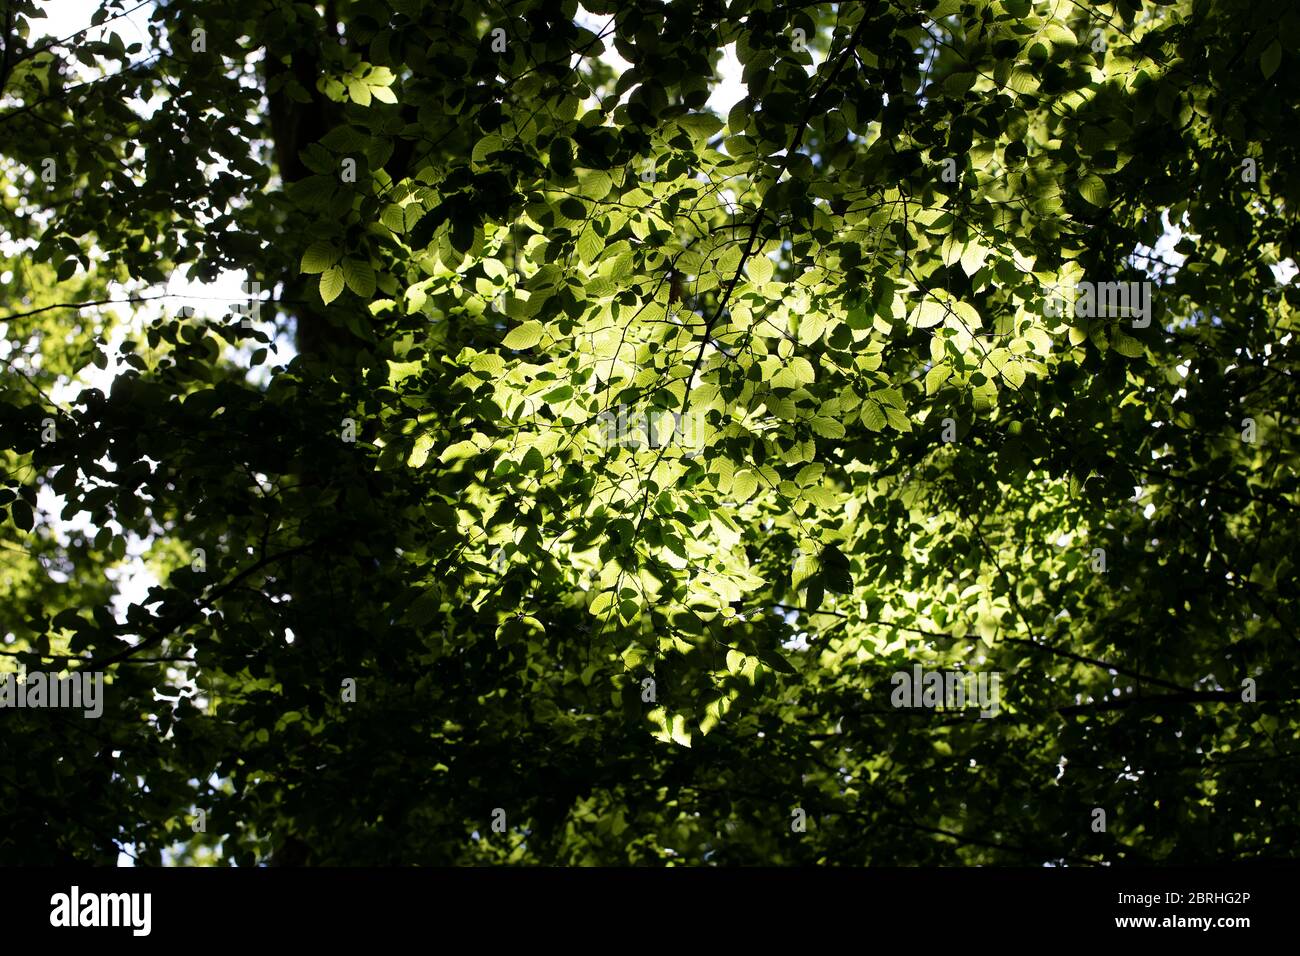 Sun shining through leaves of tree branches from a frogs perspective Stock Photo